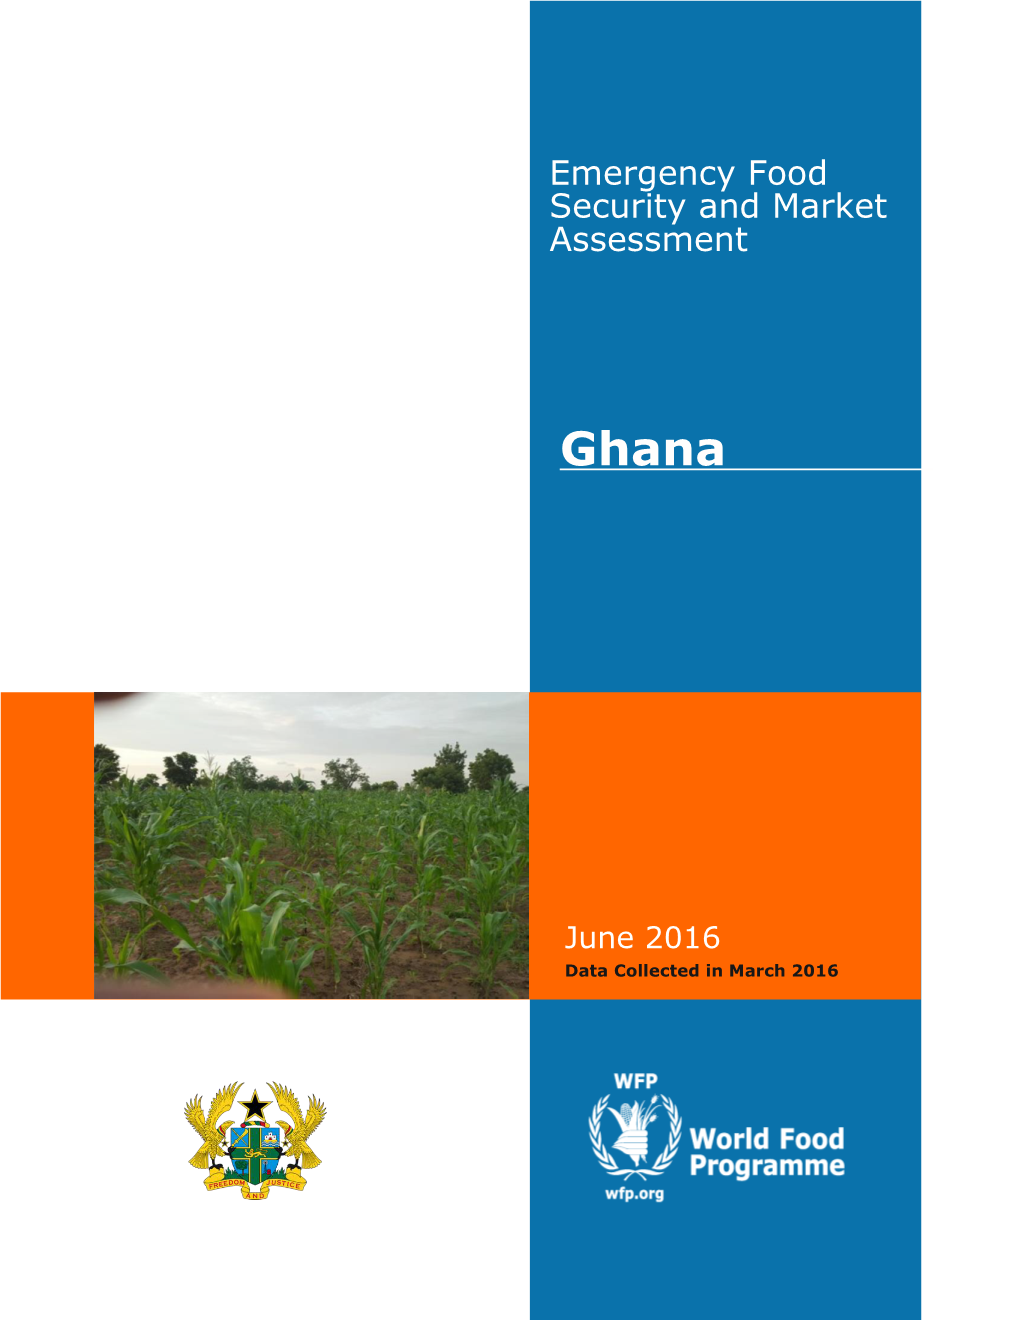 Emergency Food Security and Market Assessment in Ghana